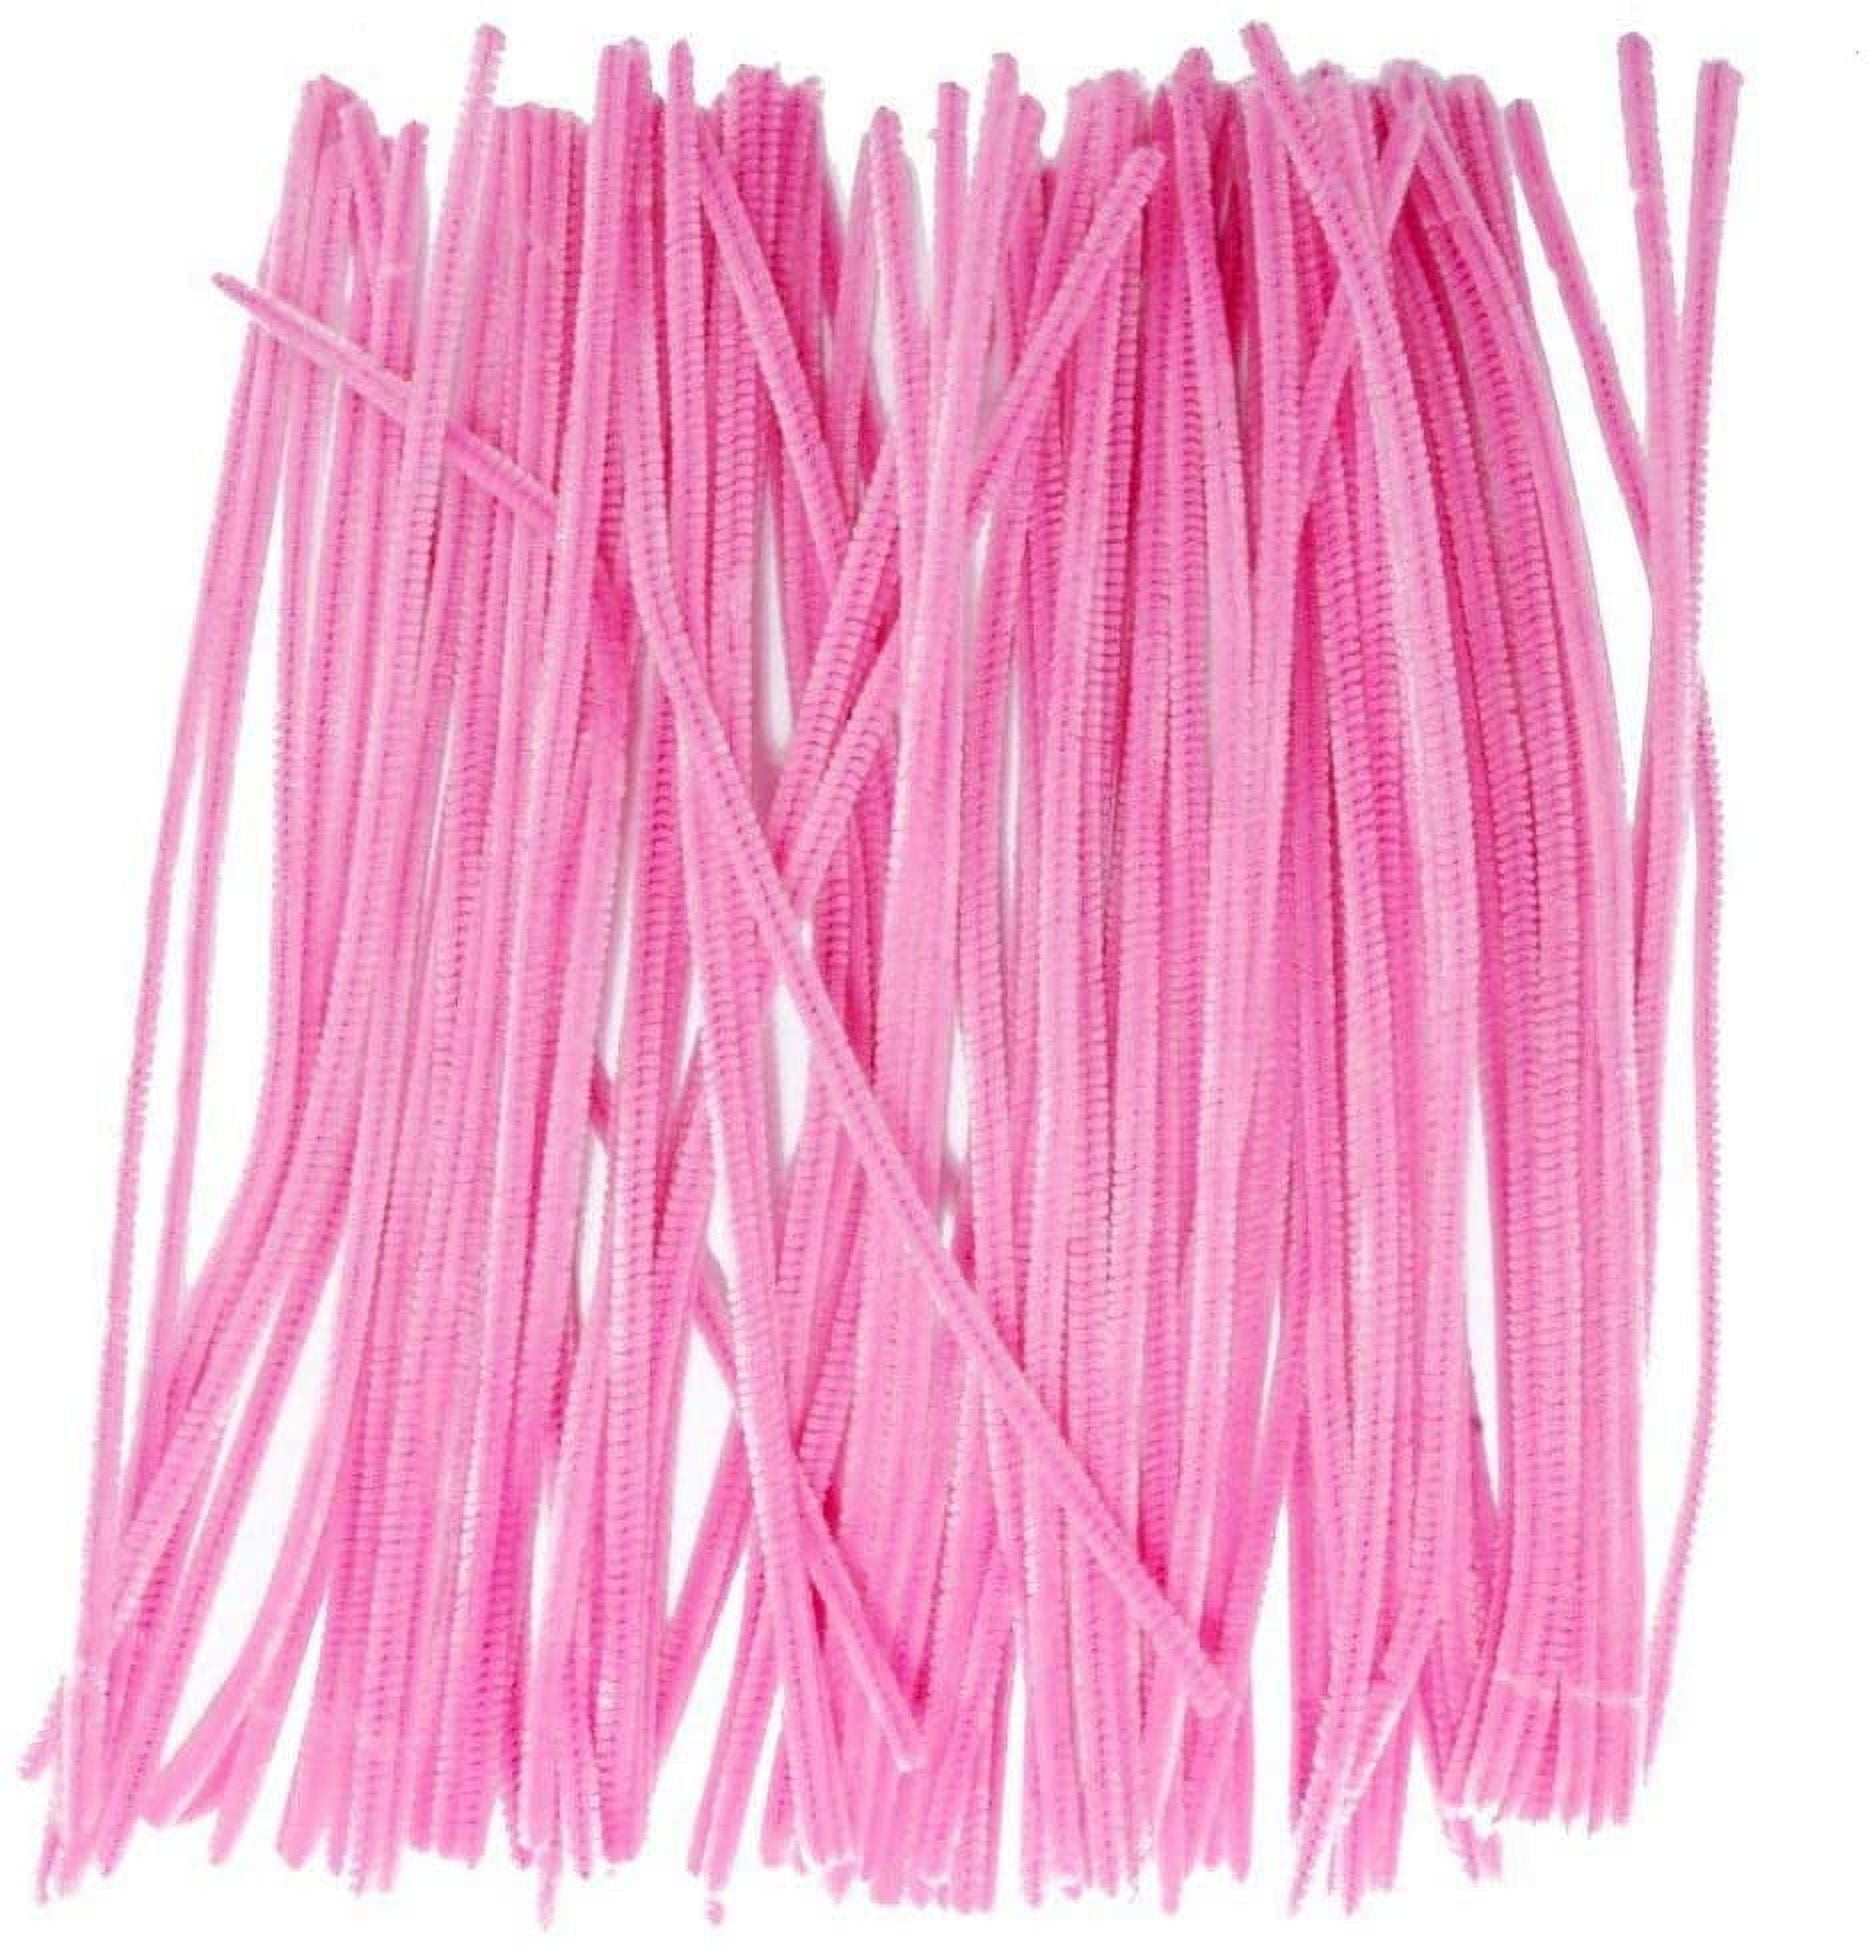 The Crafts Outlet Chenille Stems, Pipe Cleaner, 20-inch (50-cm), 25-pc,  Light Pink